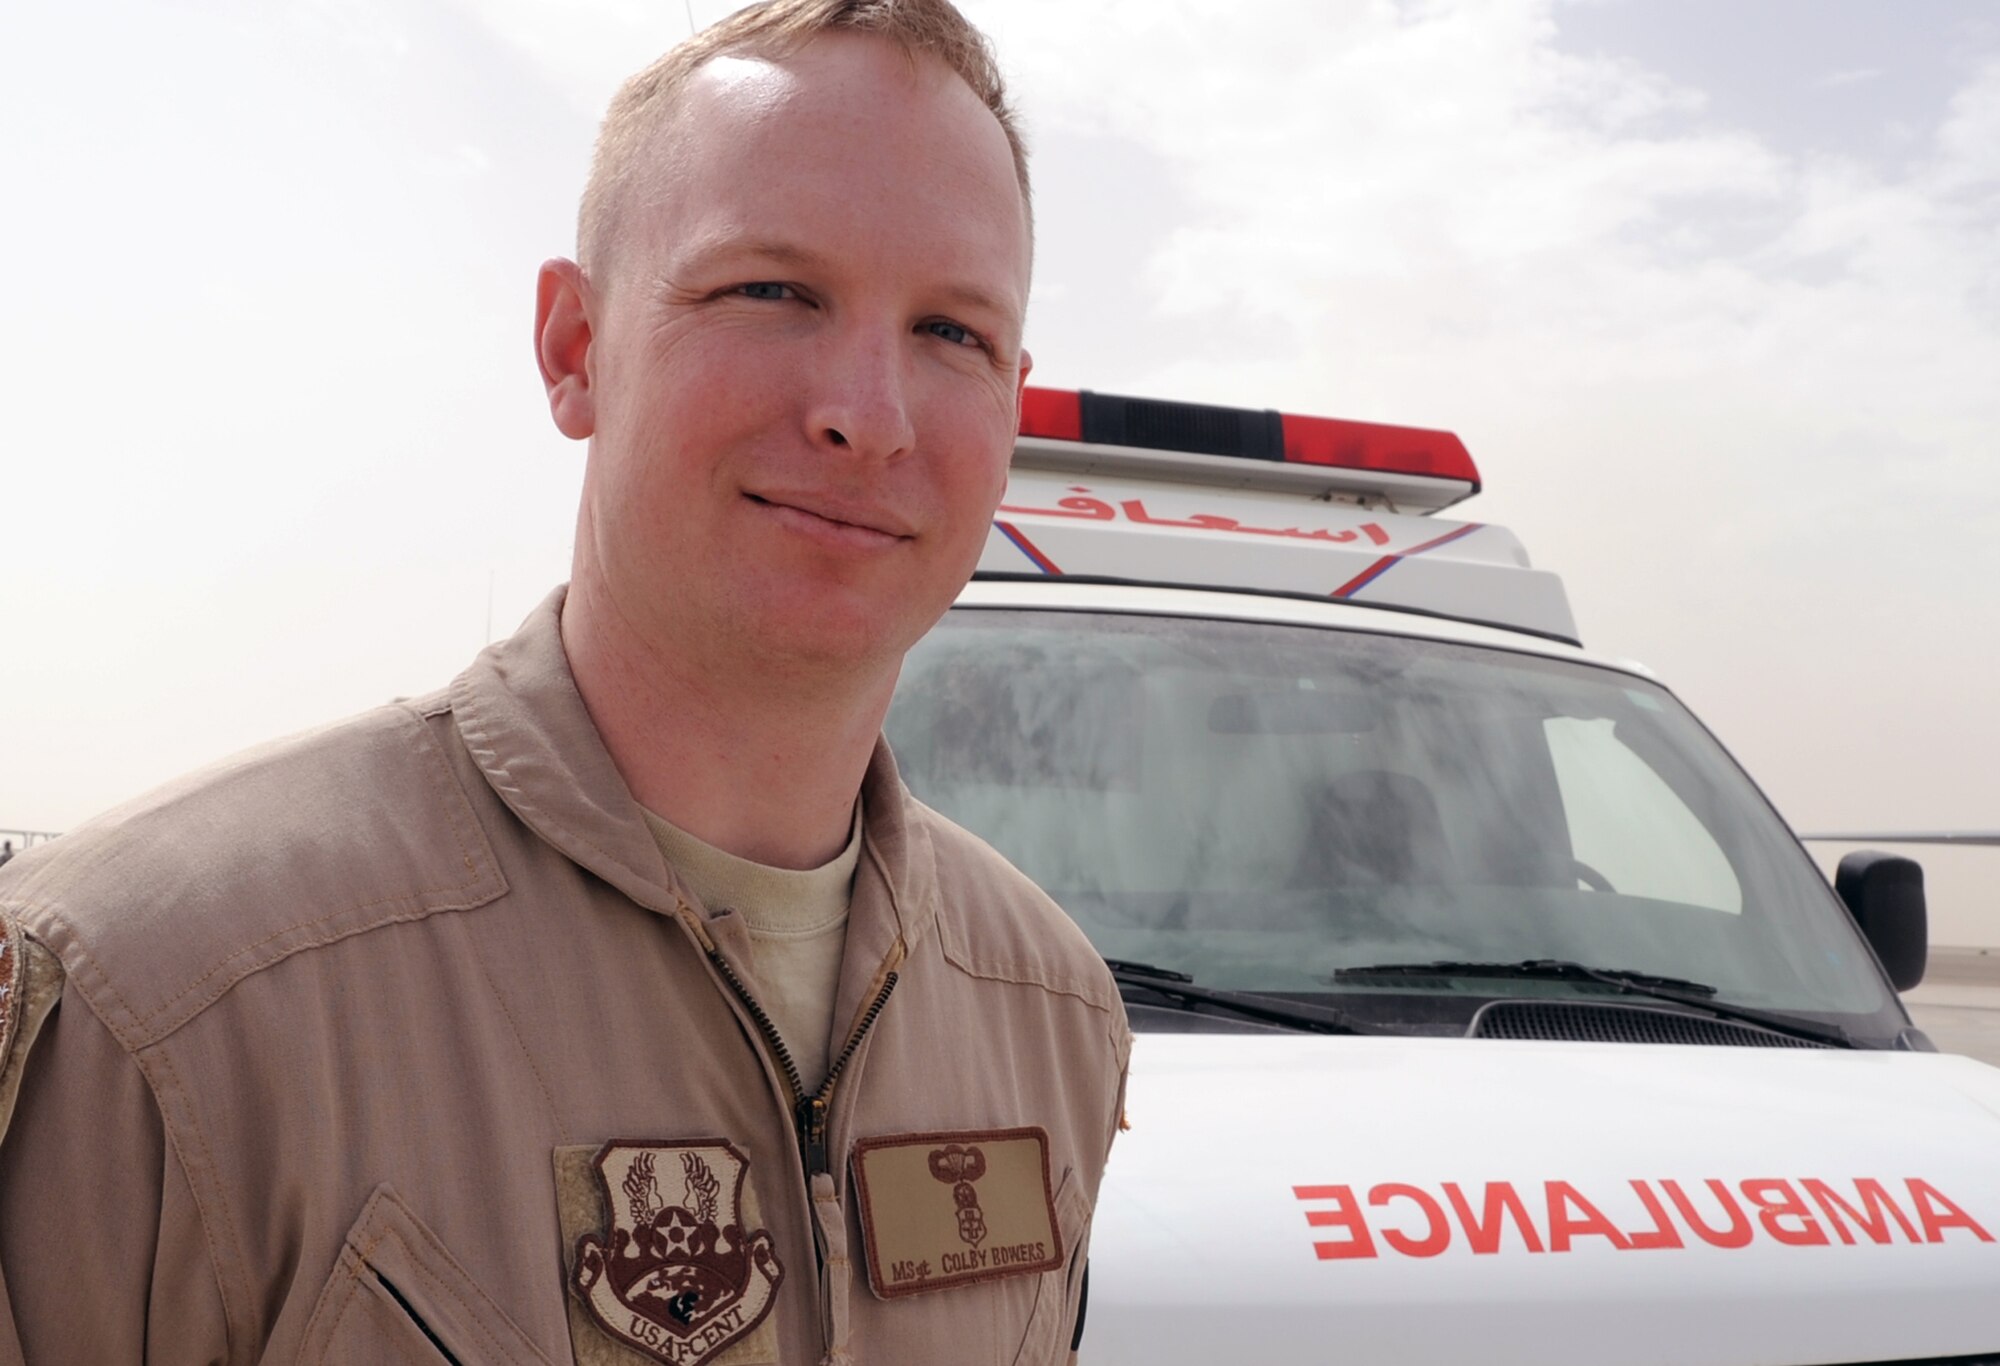 Master Sgt. Colby Bowers, an independent duty medical technician assigned to the 908th Expeditionary Air Refueling Squadron, stands near an ambulance he is qualified to use at a non-disclosed base in Southwest Asia on March 1, 2010. He is deployed from the U.S. Air Force Expeditionary Center's 421st Combat Training Squadron at Joint Base McGuire-Dix-Lakehurst, N.J. (U.S. Air Force Photo/Master Sgt. Scott T. Sturkol)